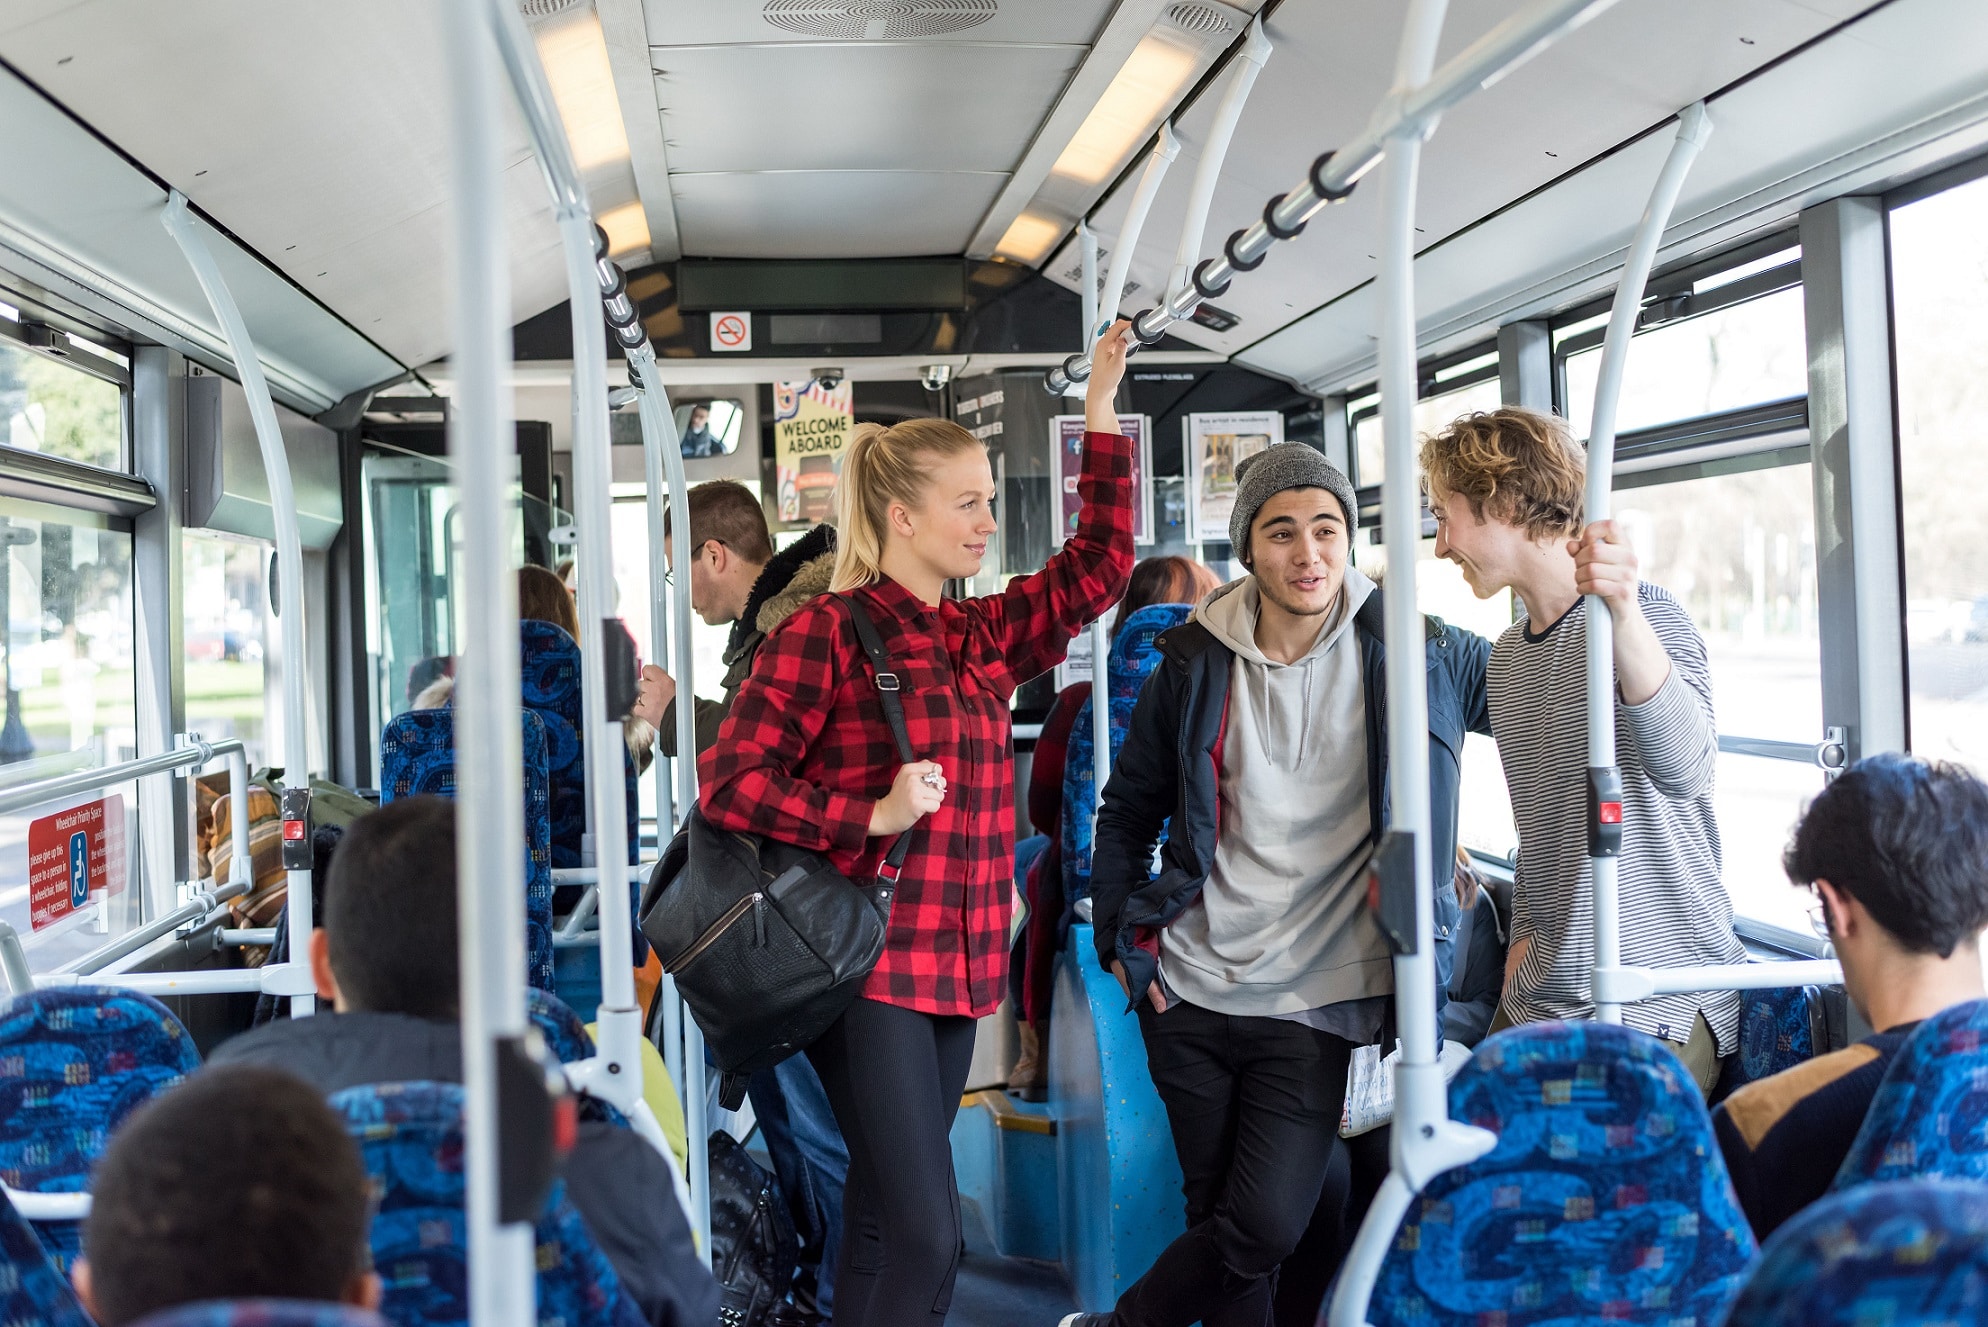 Bus industry must work closely with Generation Z